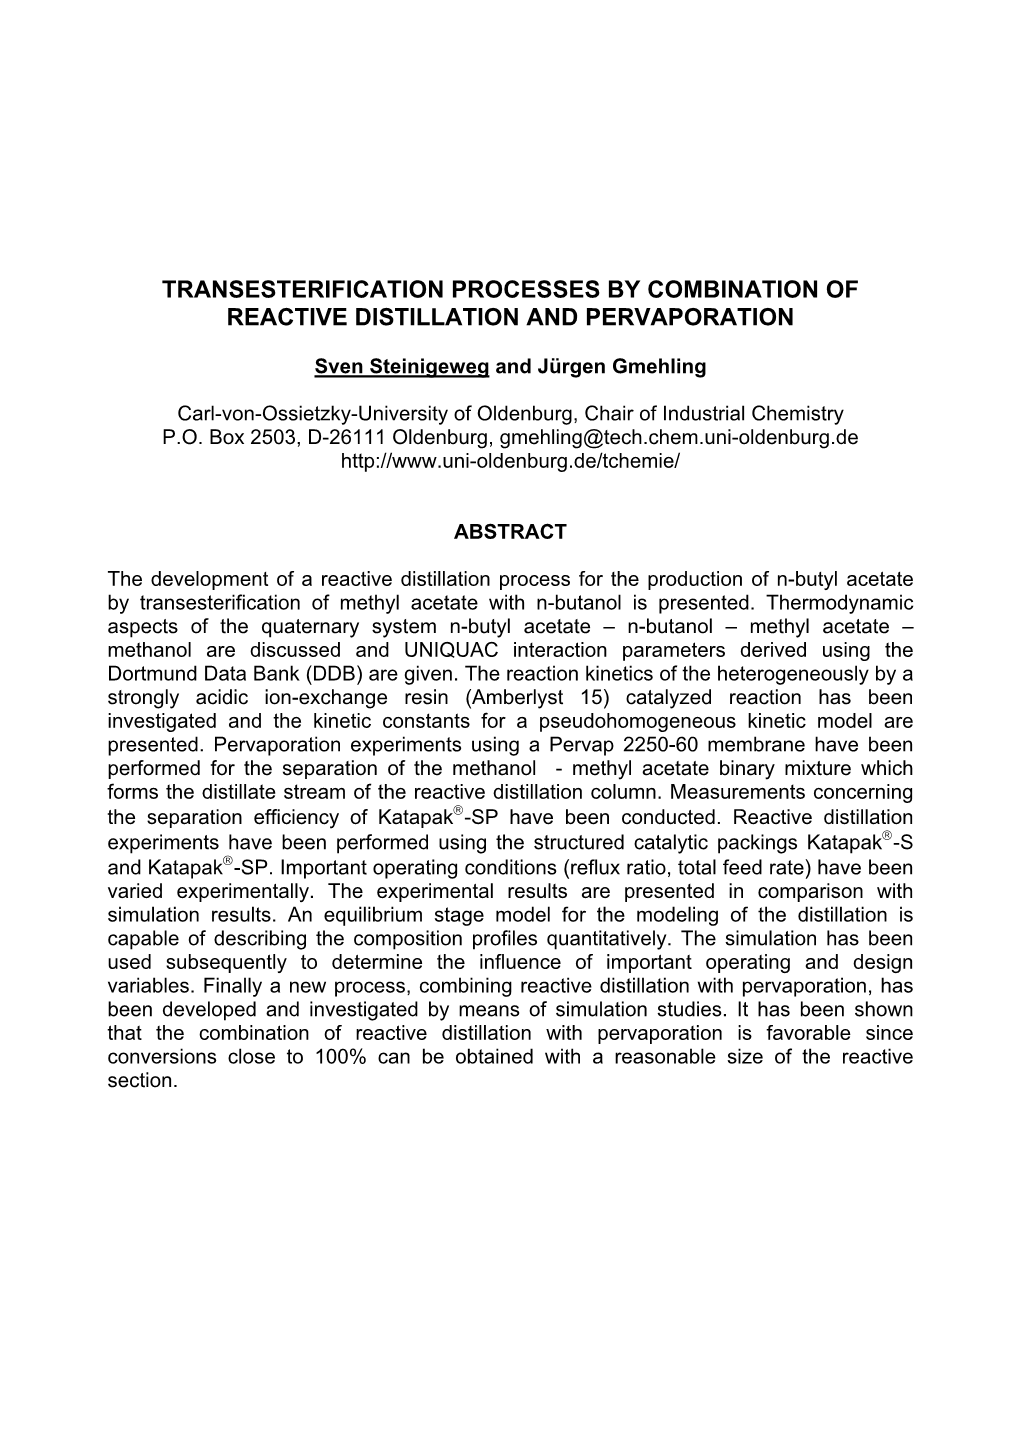 Transesterification Processes by Combination of Reactive Distillation and Pervaporation